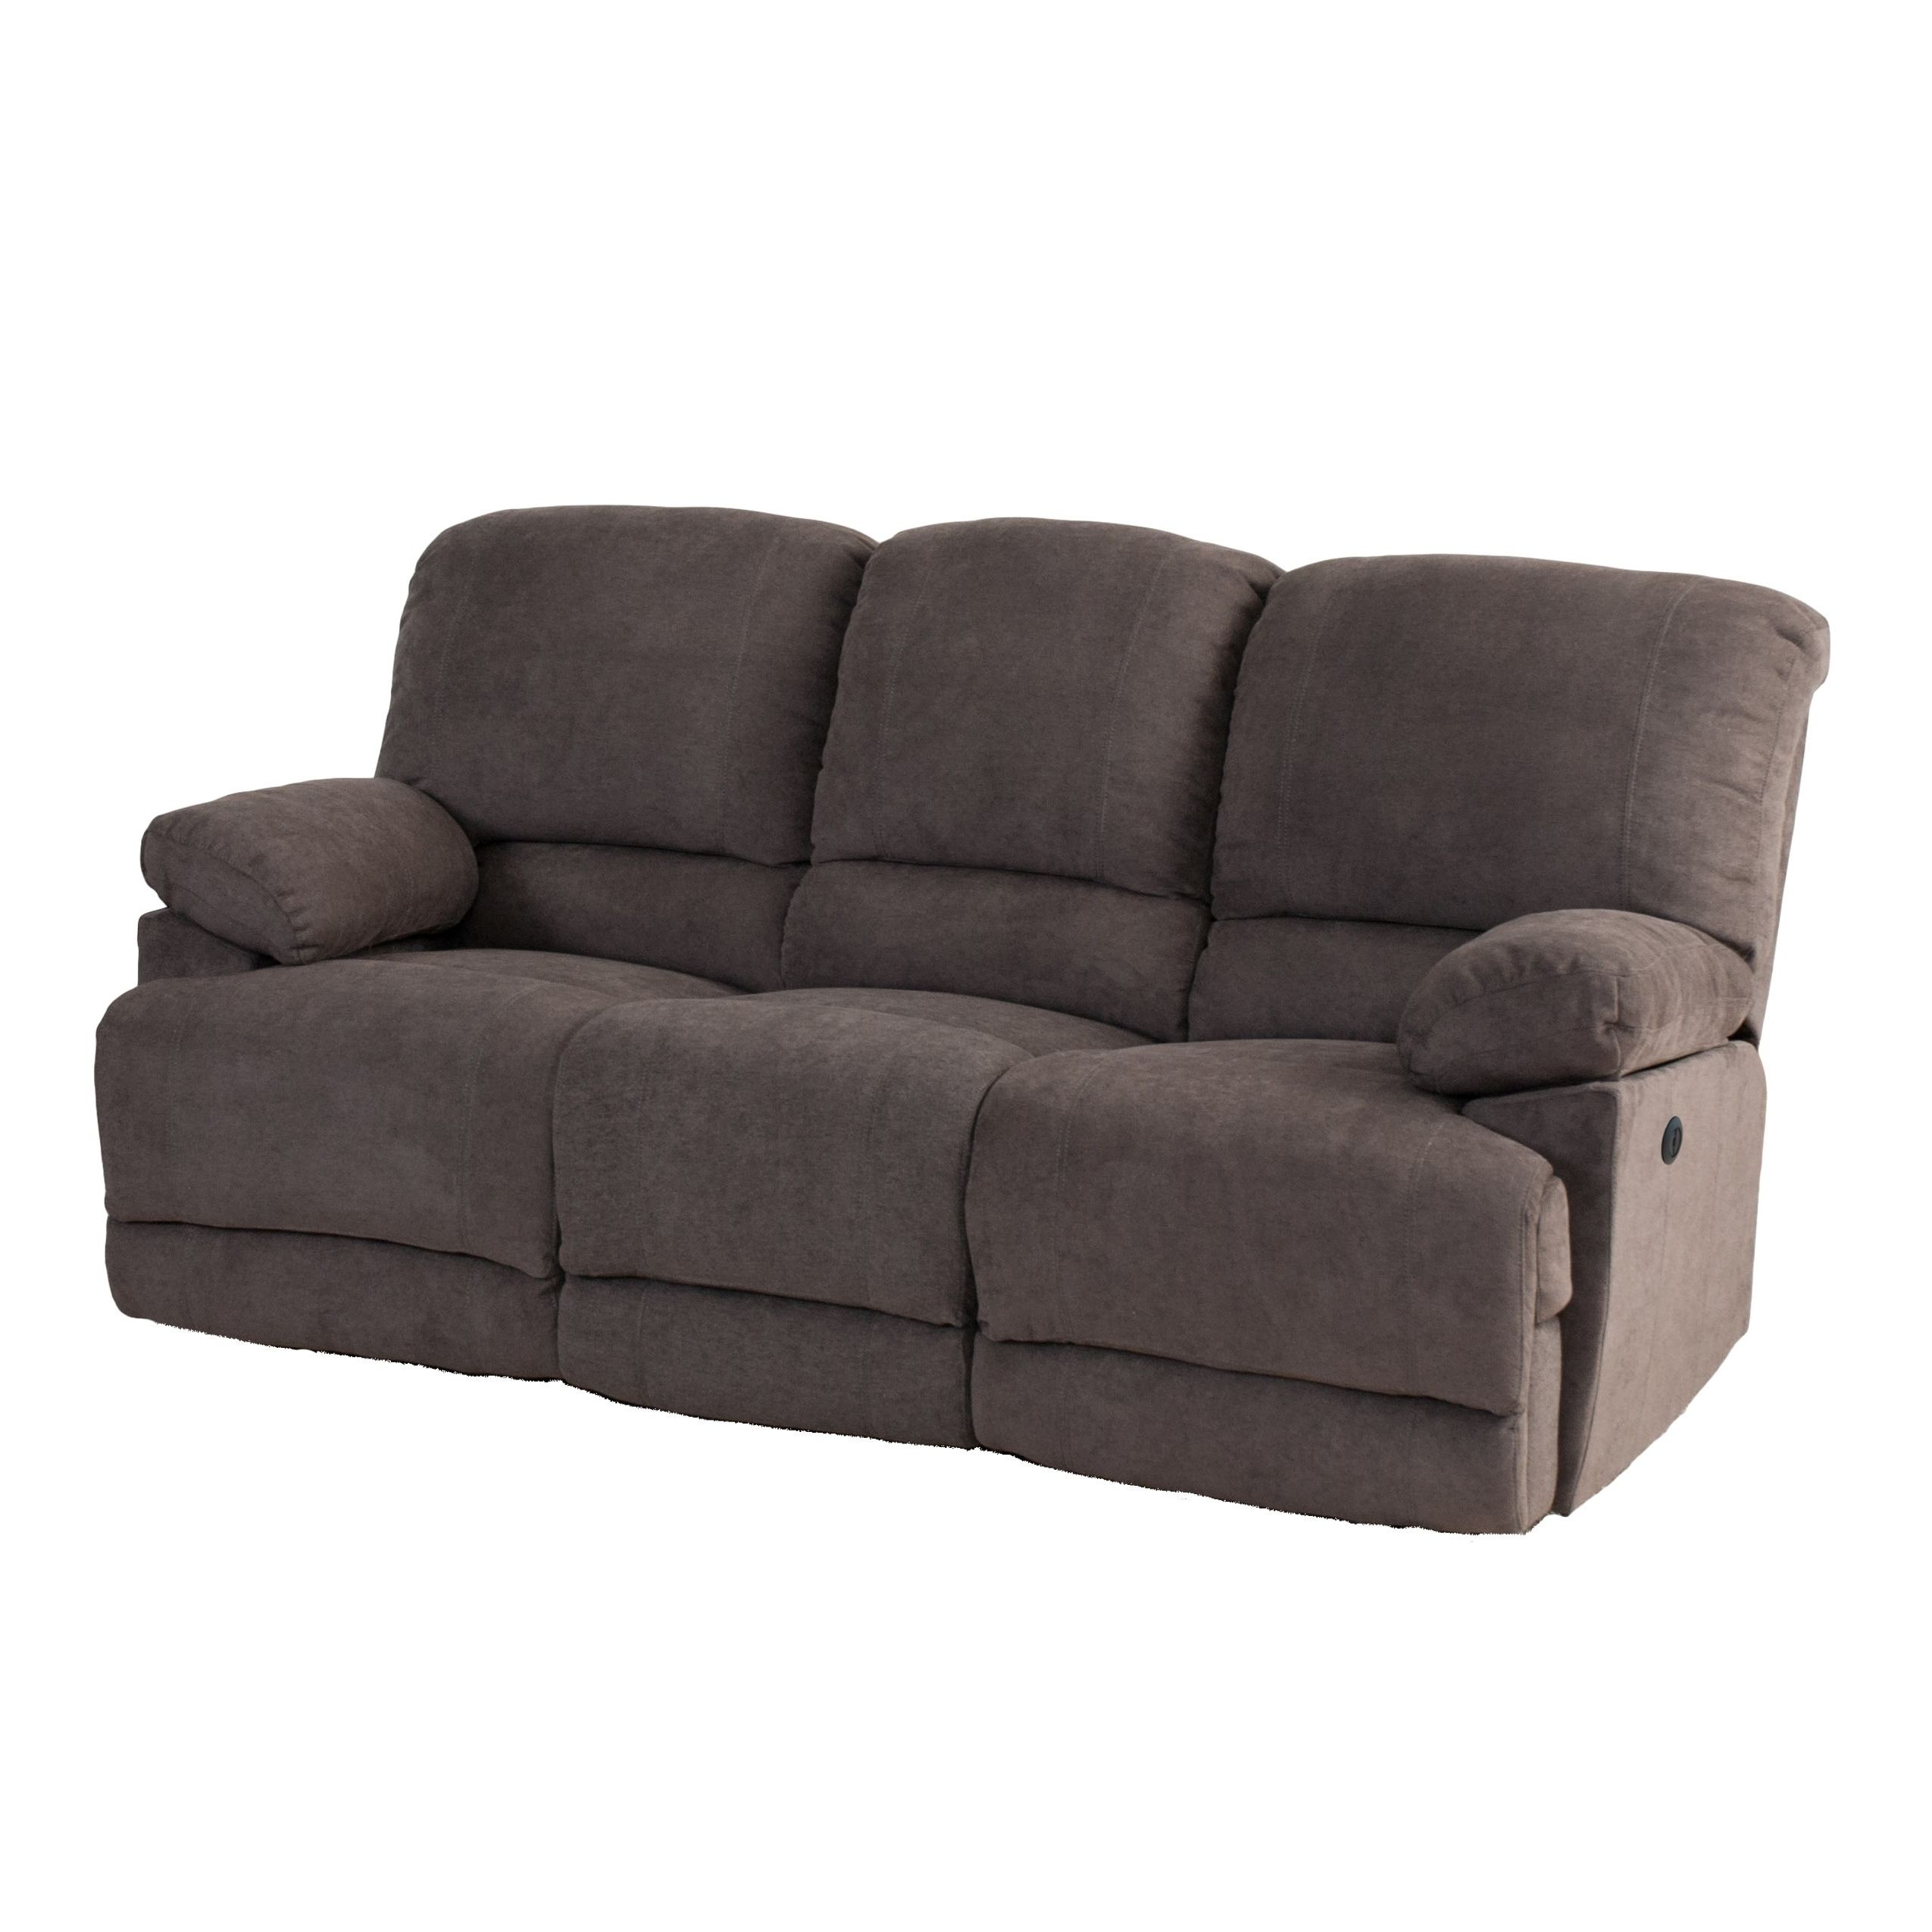 Ebay In Preferred Power Reclining Sofas (View 11 of 15)